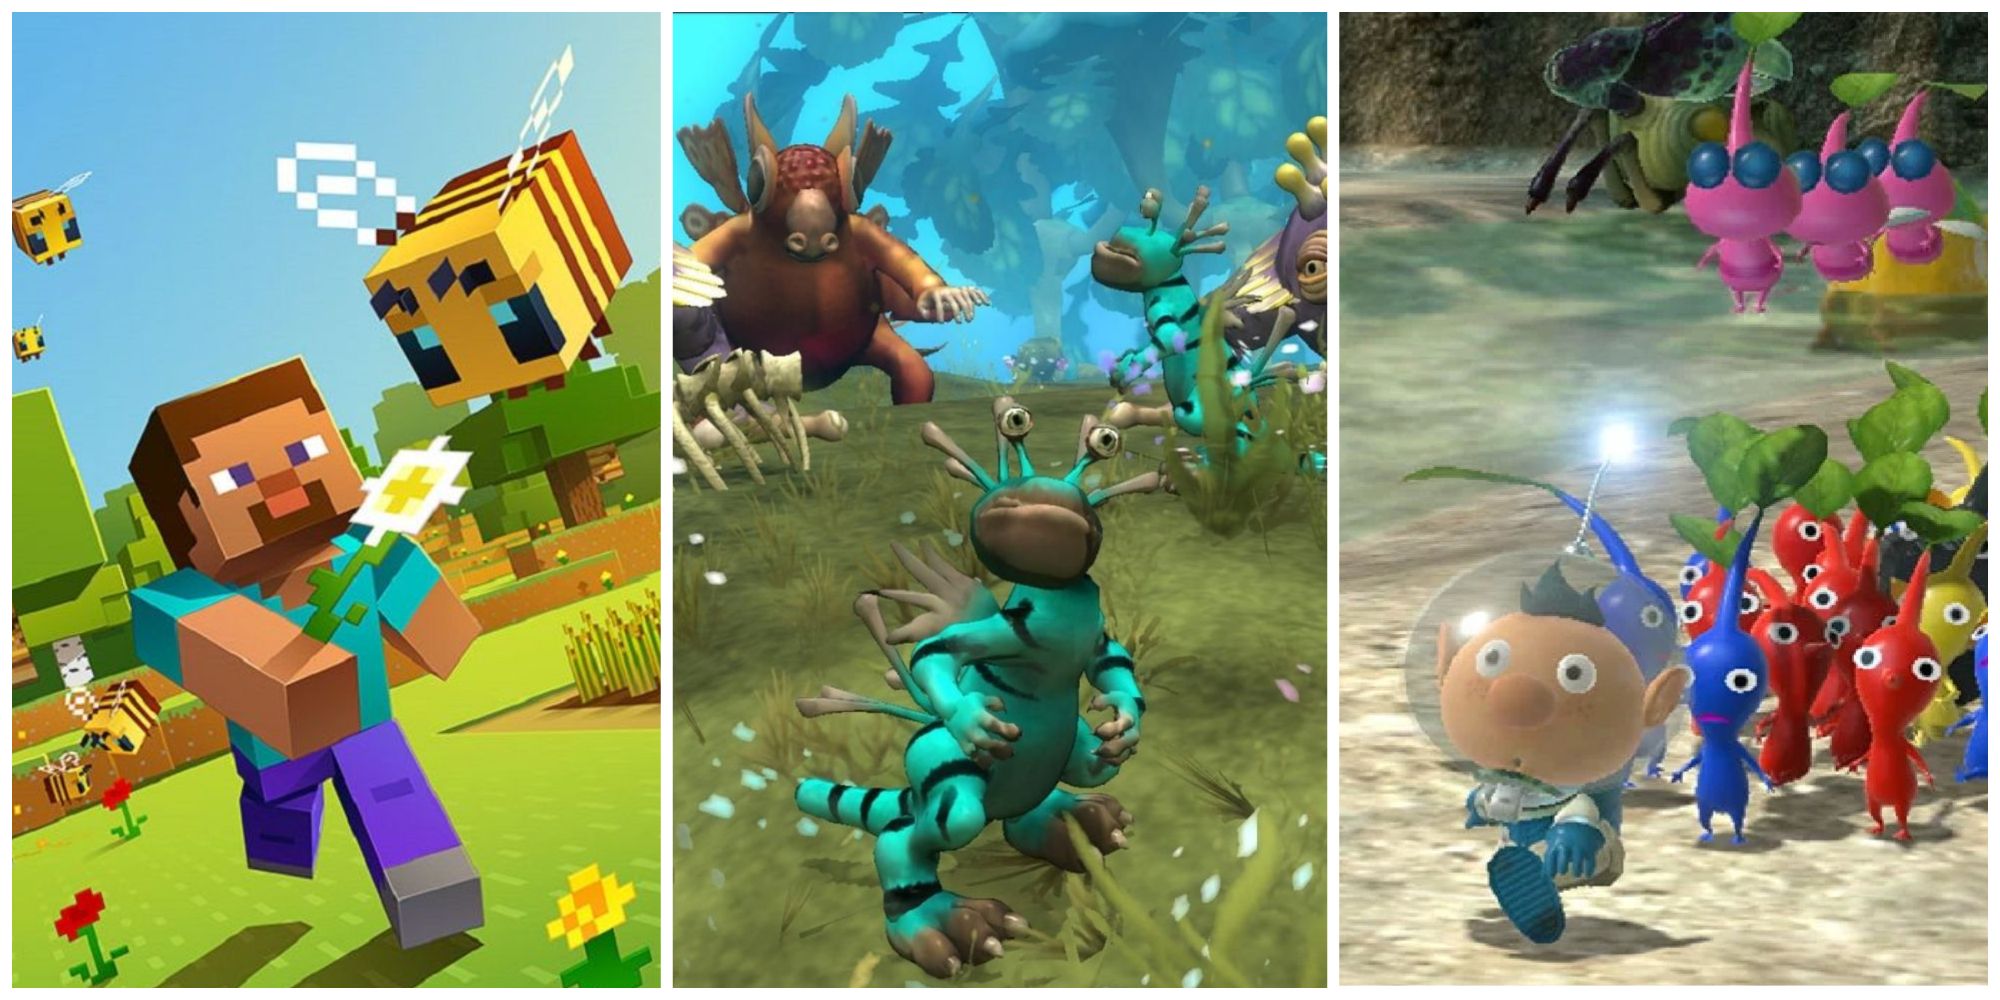 Left: Minecraft's Steve chasing a bee. Center: A blue bipedal creature from Spore in front of two other creatures in a grassy field. Right: A man in an astronaut suit leading colorful creatures with leaves on their heads.